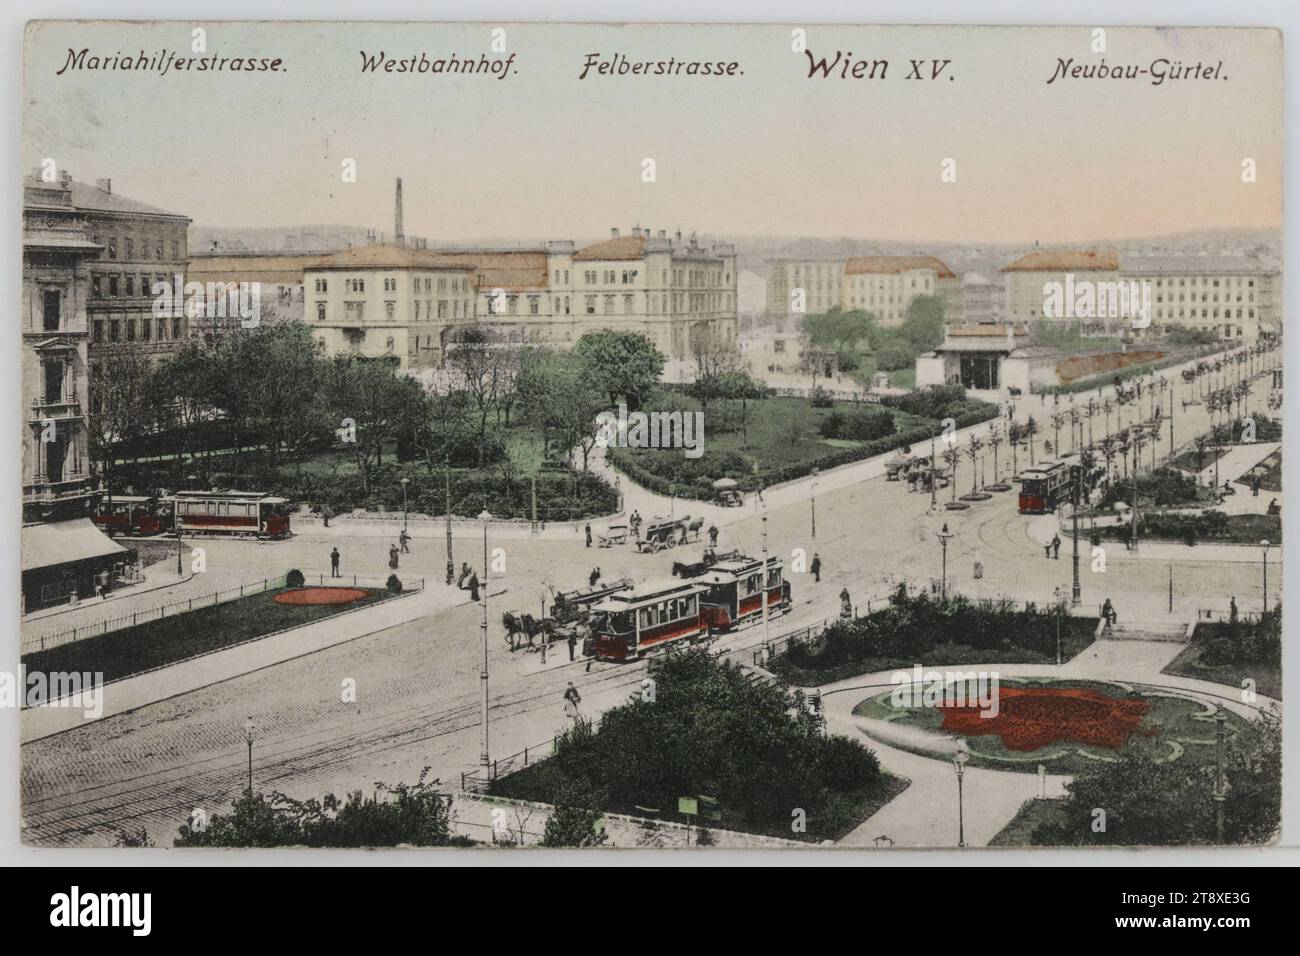 15th, Europaplatz - with Westbahnhof and Stadtbahn stop, picture postcard, Paul Ledermann (1882-1946), Producer, 1909, paperboard, hand colored, Collotype, height×width 9×13, 8 cm, Inscription, FROM, Vienna, TO, Vienna, ADDRESS, Wohlgeboren, Frau, XVII ². Vienna, Zwerngasse 16, MESSAGE, Vienna, Sept. 6, 1909, Dear Adele! Returning from Scheibbs, I found your dear card with the picture of your sweet little one and thank you very much for it, he looks splendid, I am looking forward to seeing him soon. I also thank your dear husband for the successful recording Stock Photo